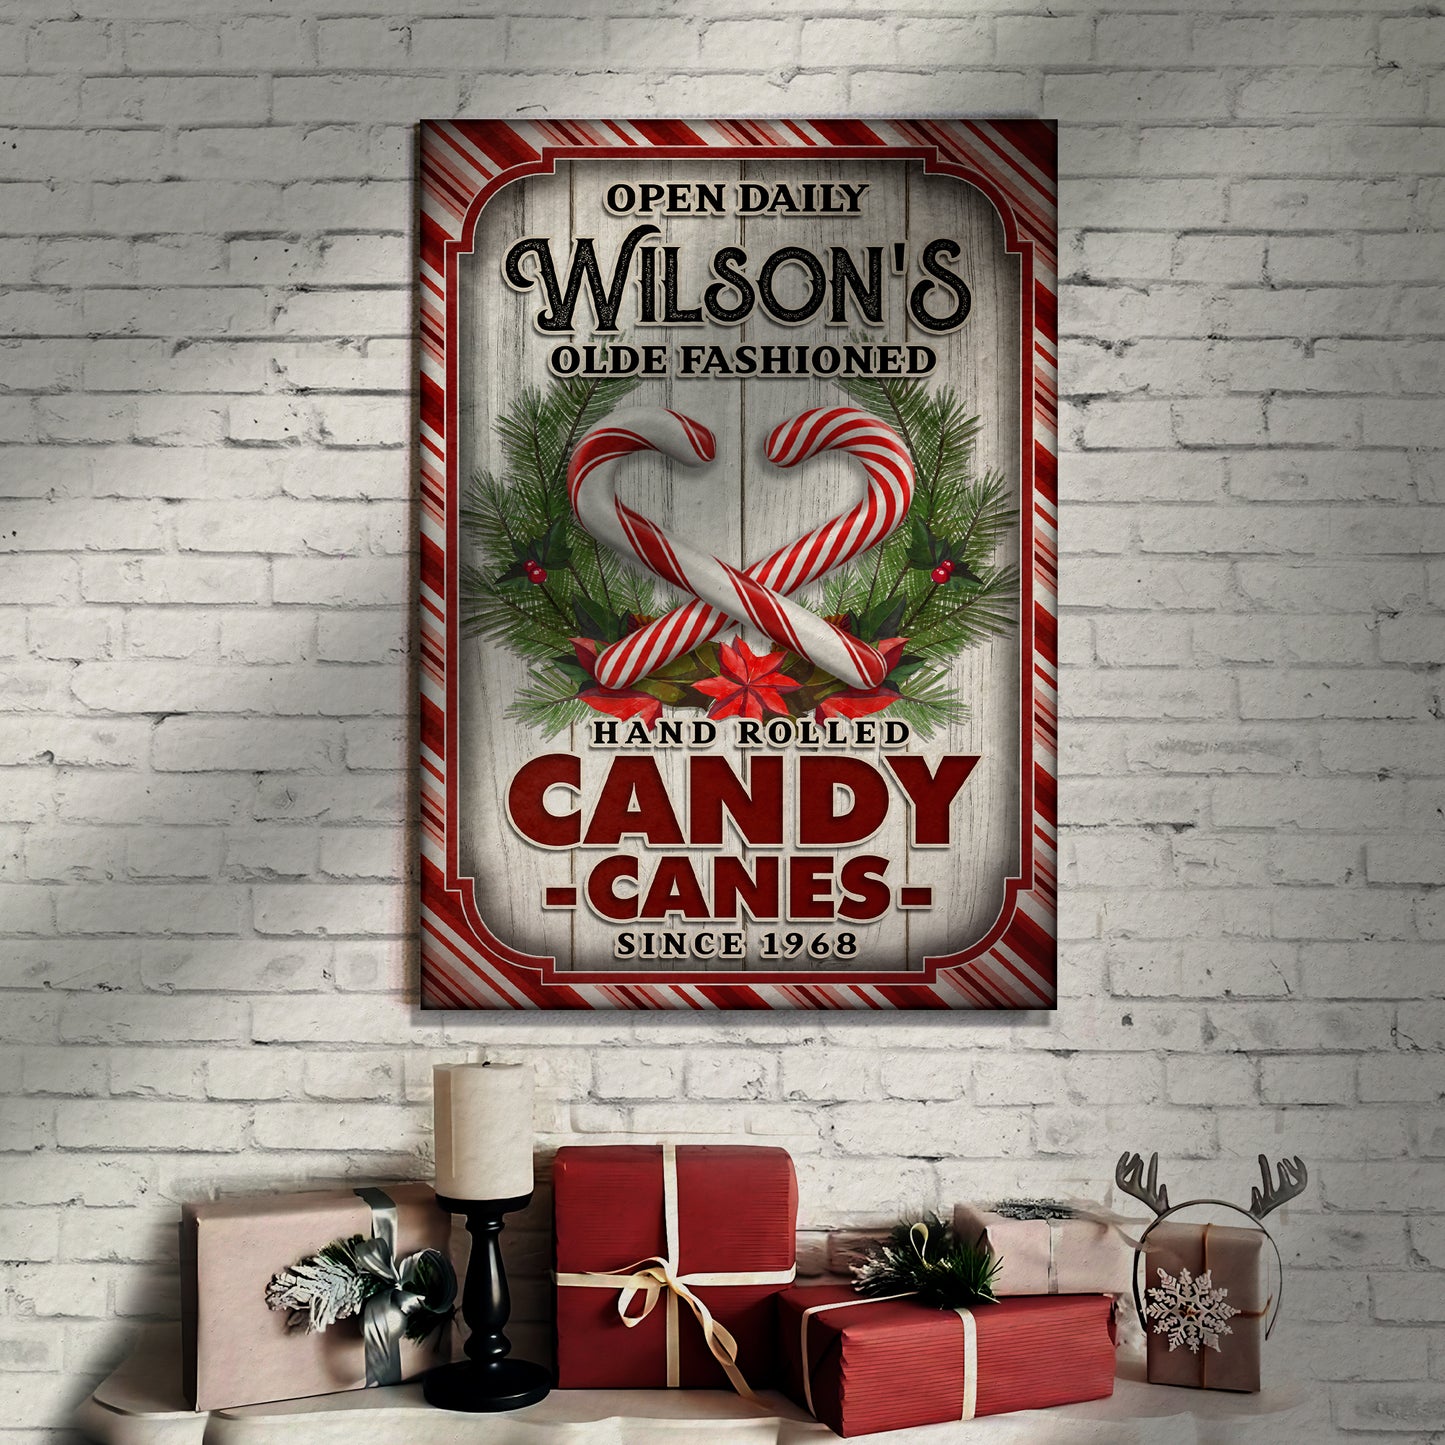 Olde Fashioned Hand Rolled Candy Canes Sign Style 1 - Image by Tailored Canvases